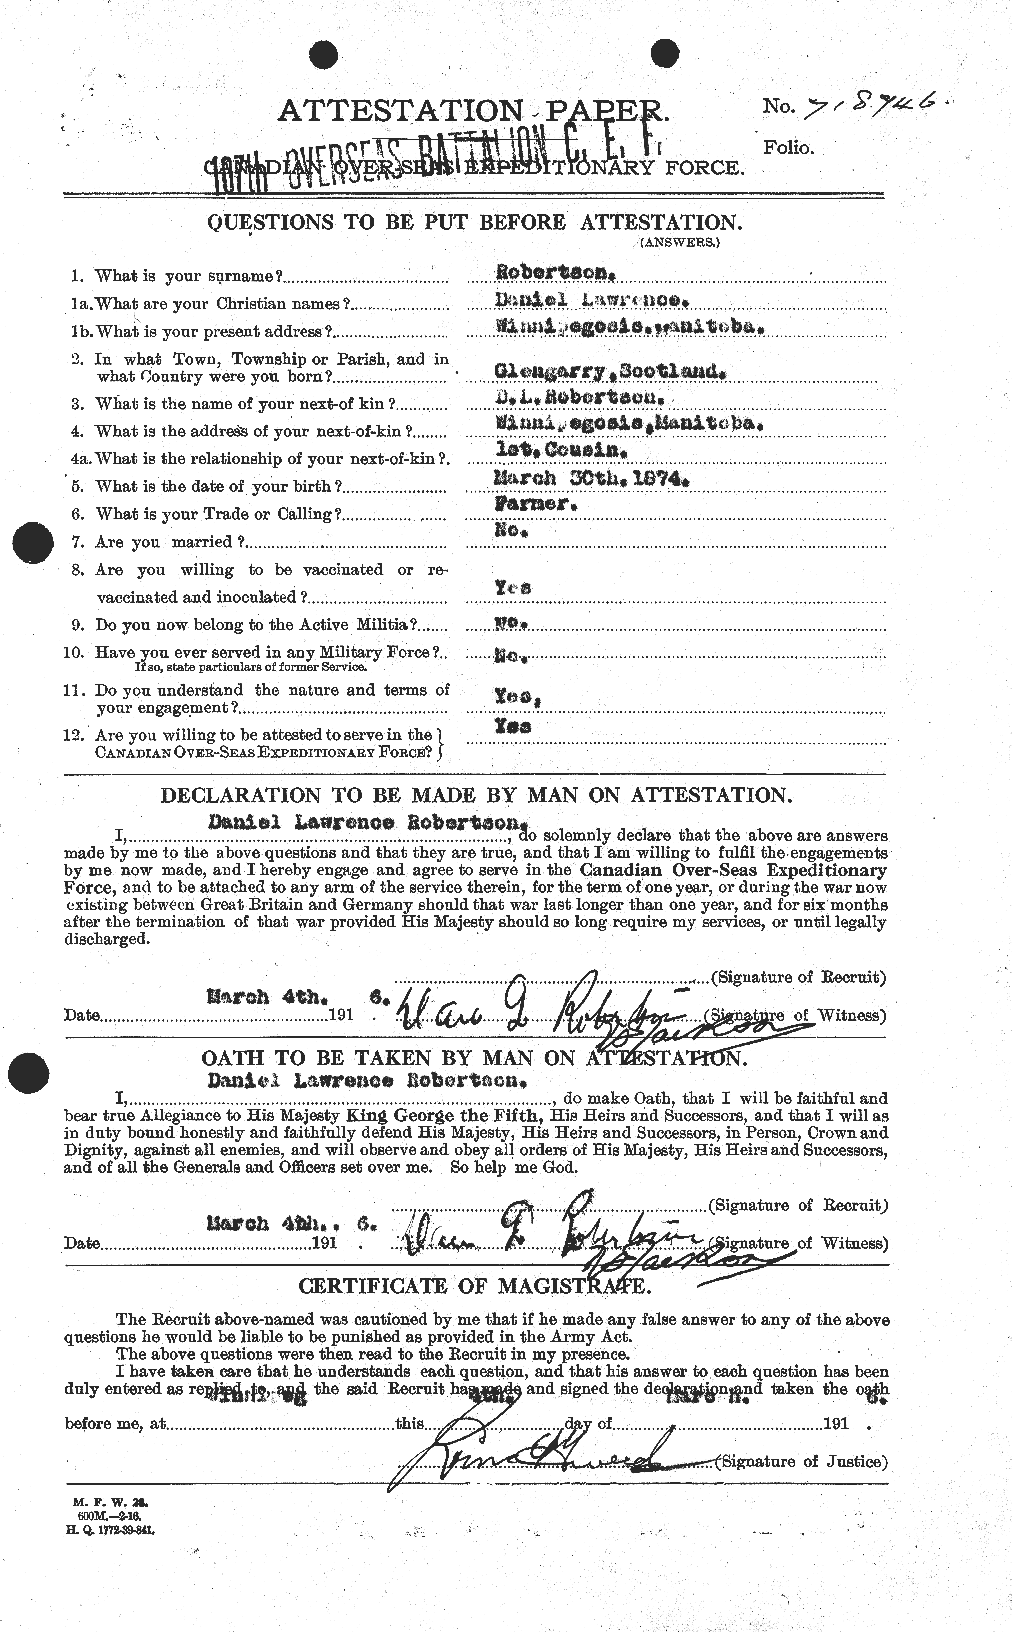 Personnel Records of the First World War - CEF 608814a